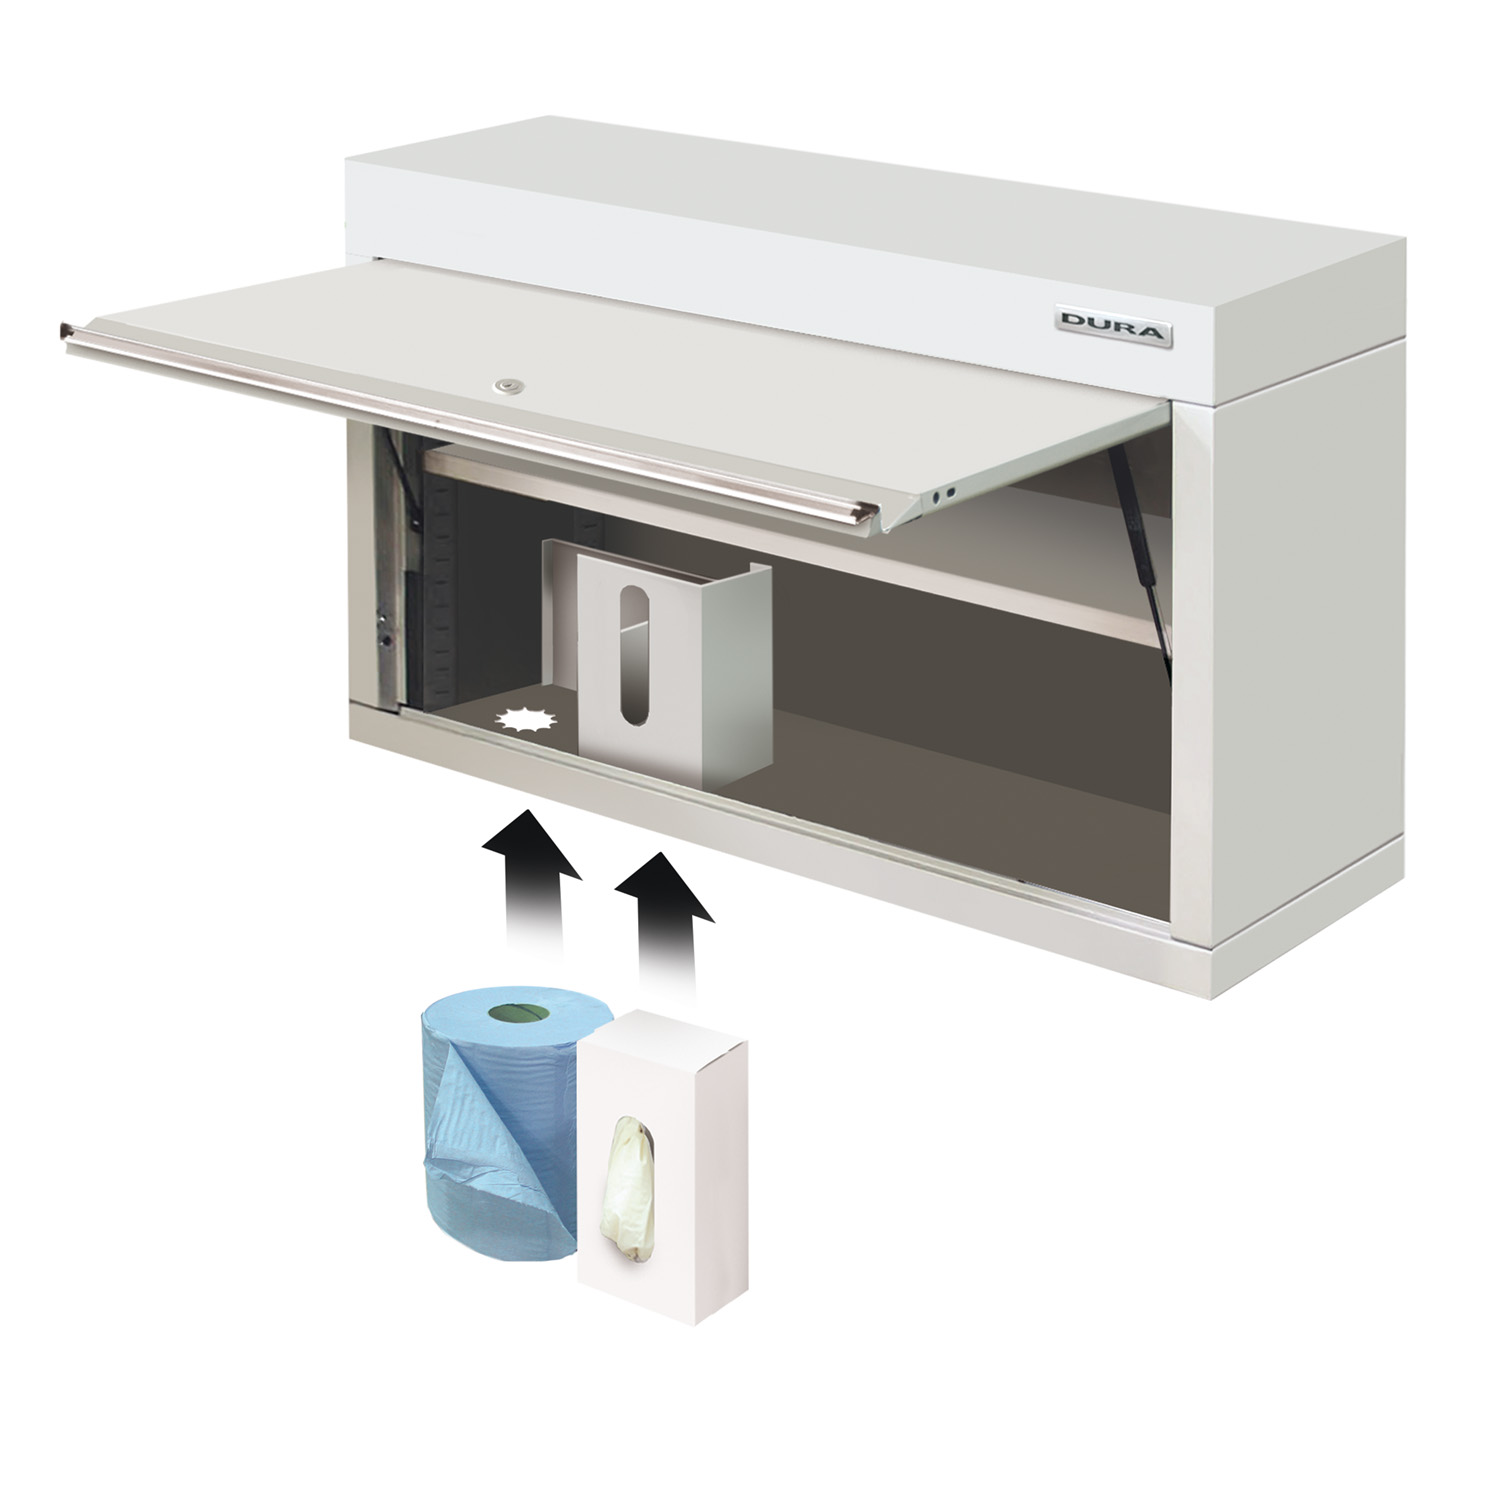 Wall cabinet with towel & glove dispenser (1200mm)